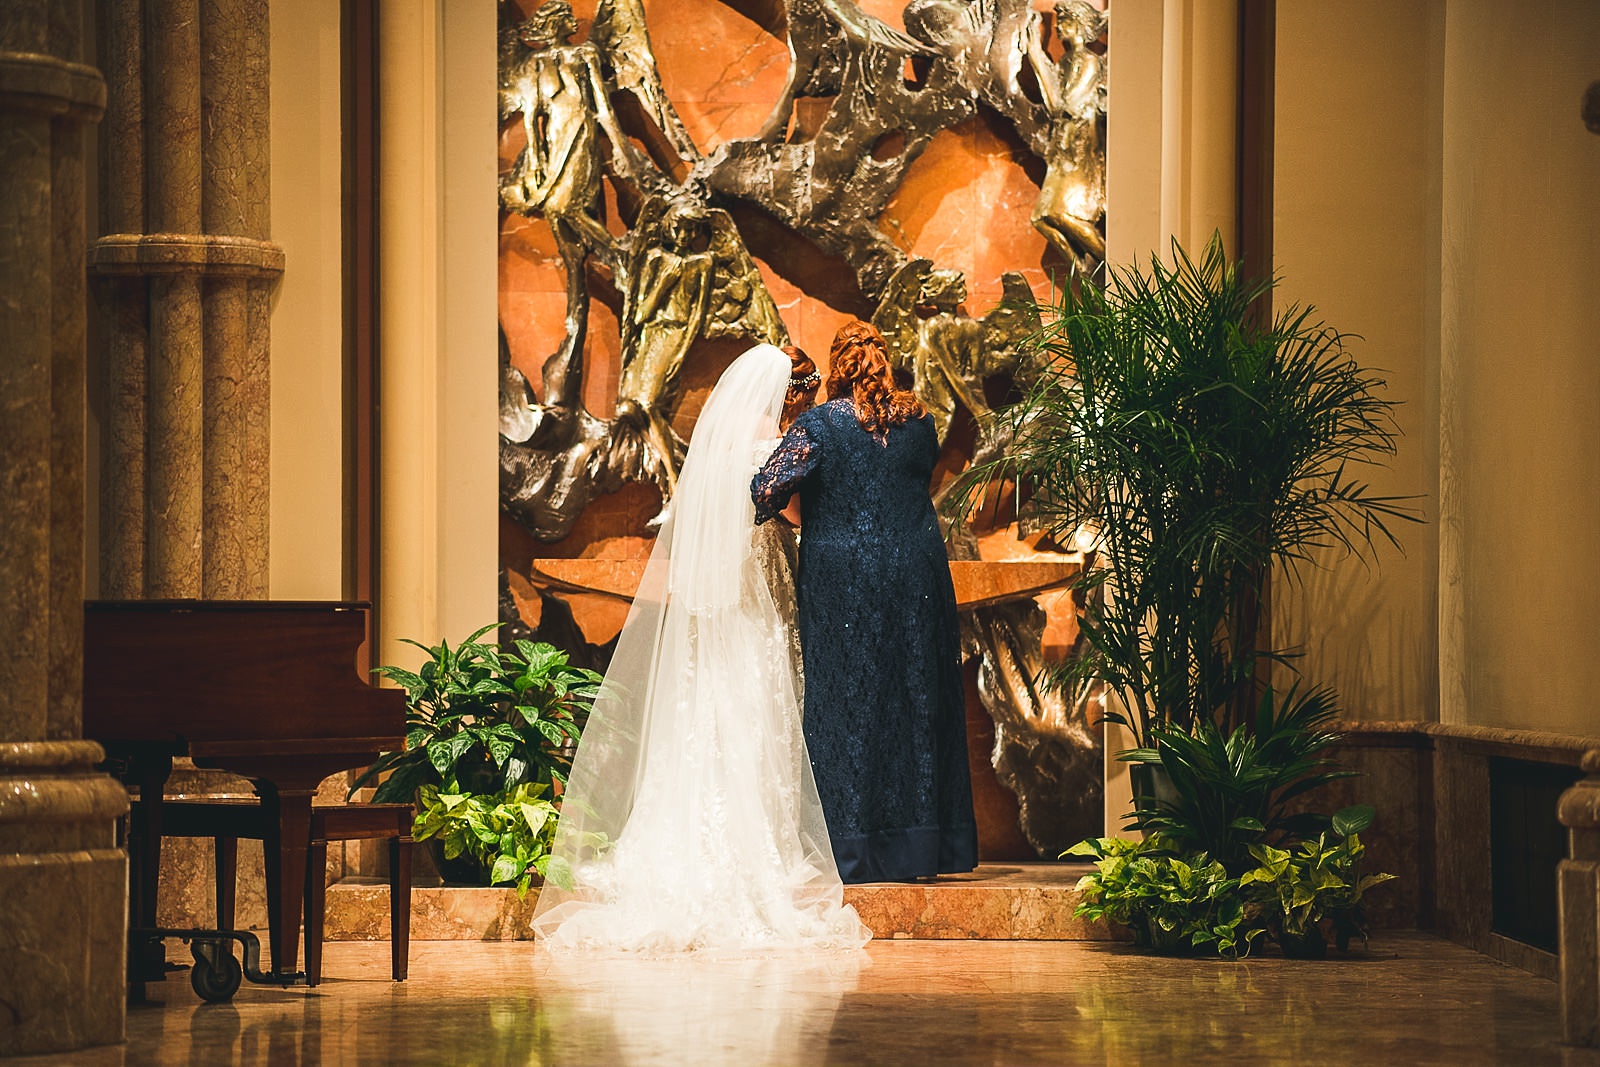 38 offering to mary at church - Hilton Chicago Wedding Photographer // Sarah + Aaron